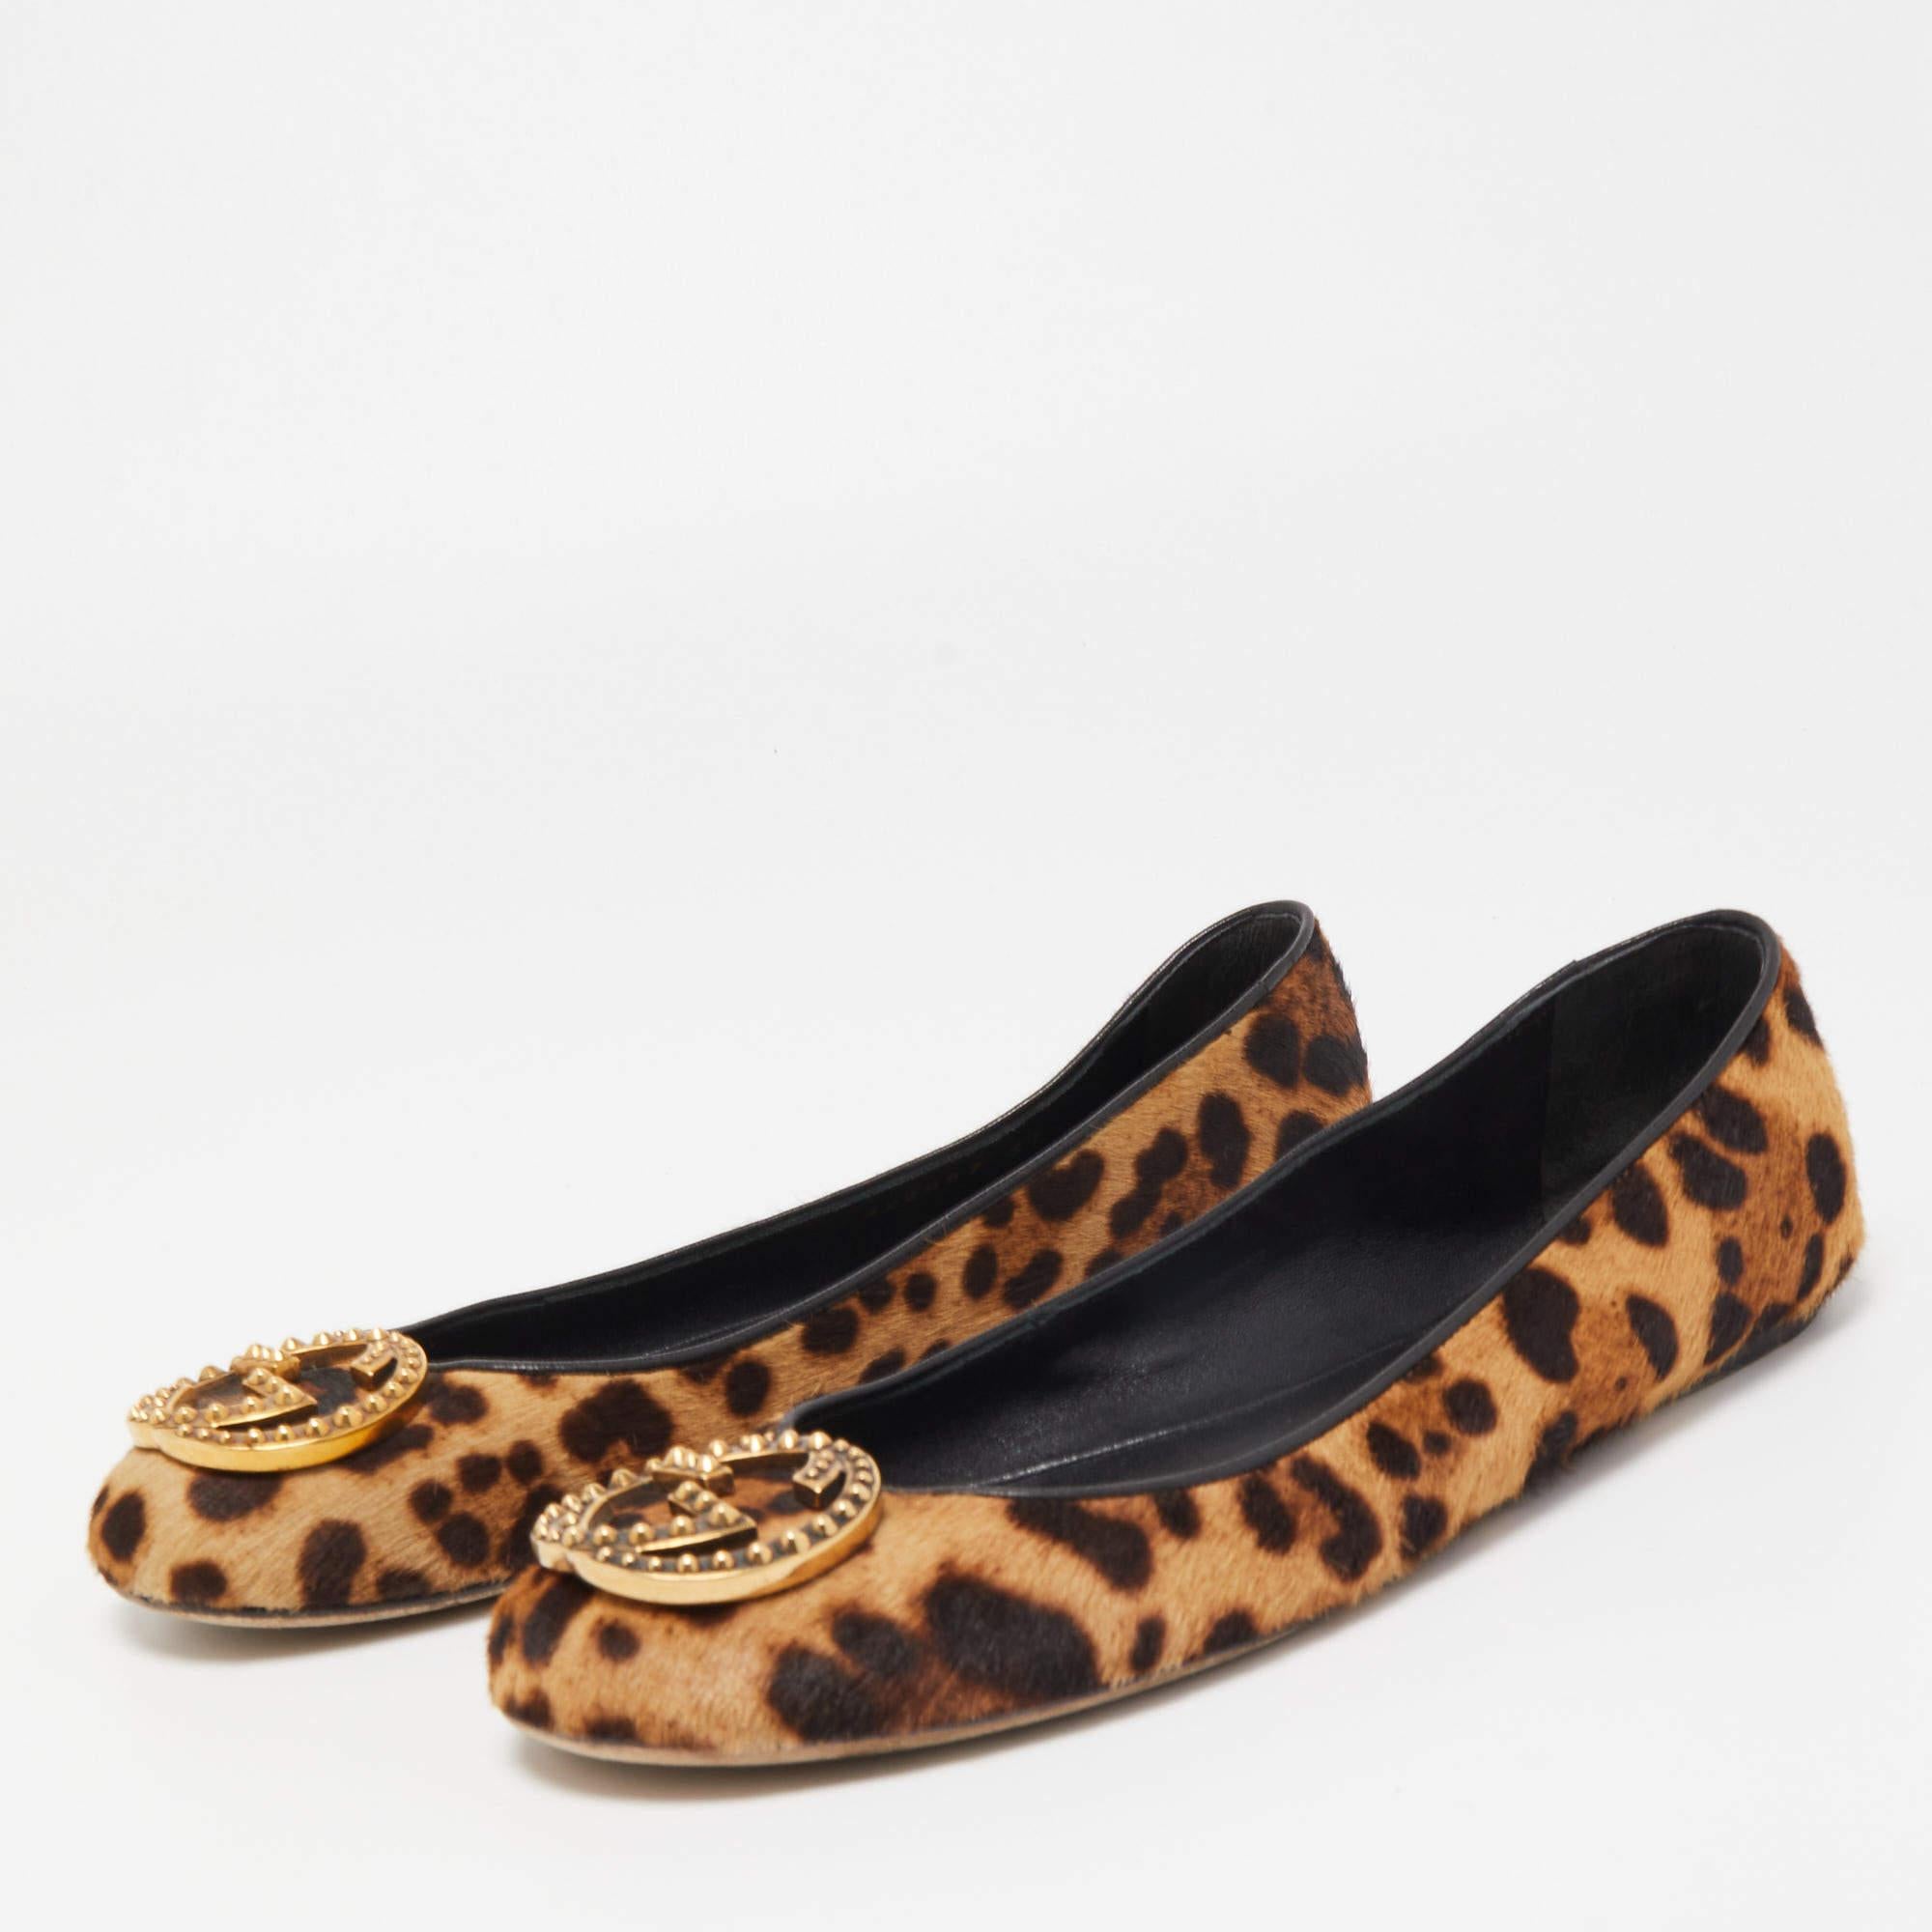 Complete your look by adding these Gucci ballet flats to your collection of everyday footwear. They are crafted skilfully to grant the perfect fit and style.

